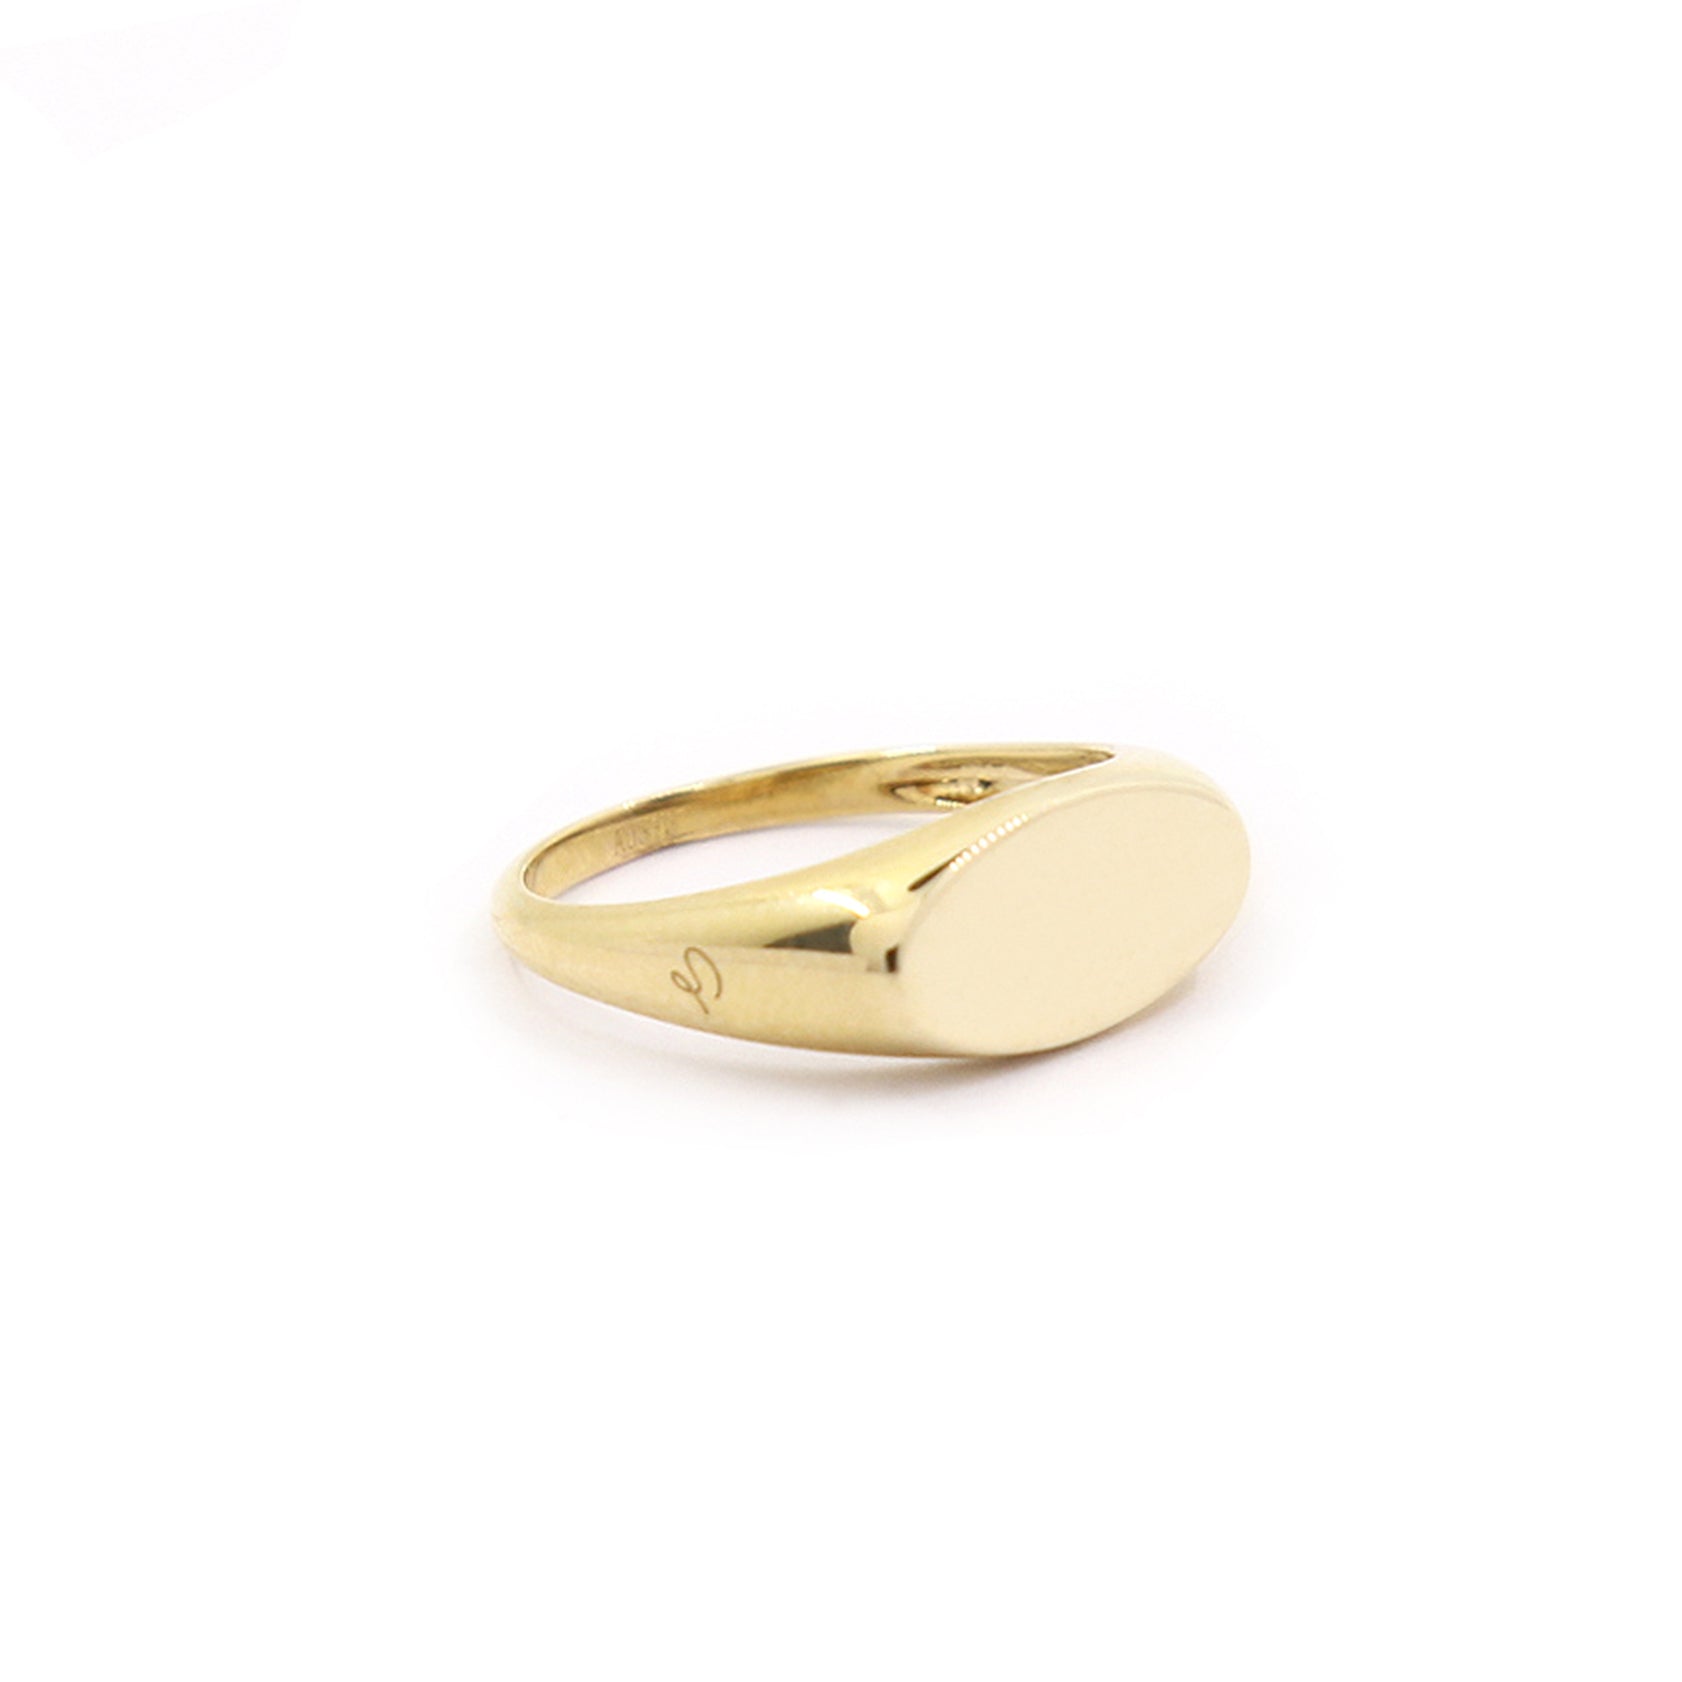 Shop Gold Pacha Oval Signet Ring Online